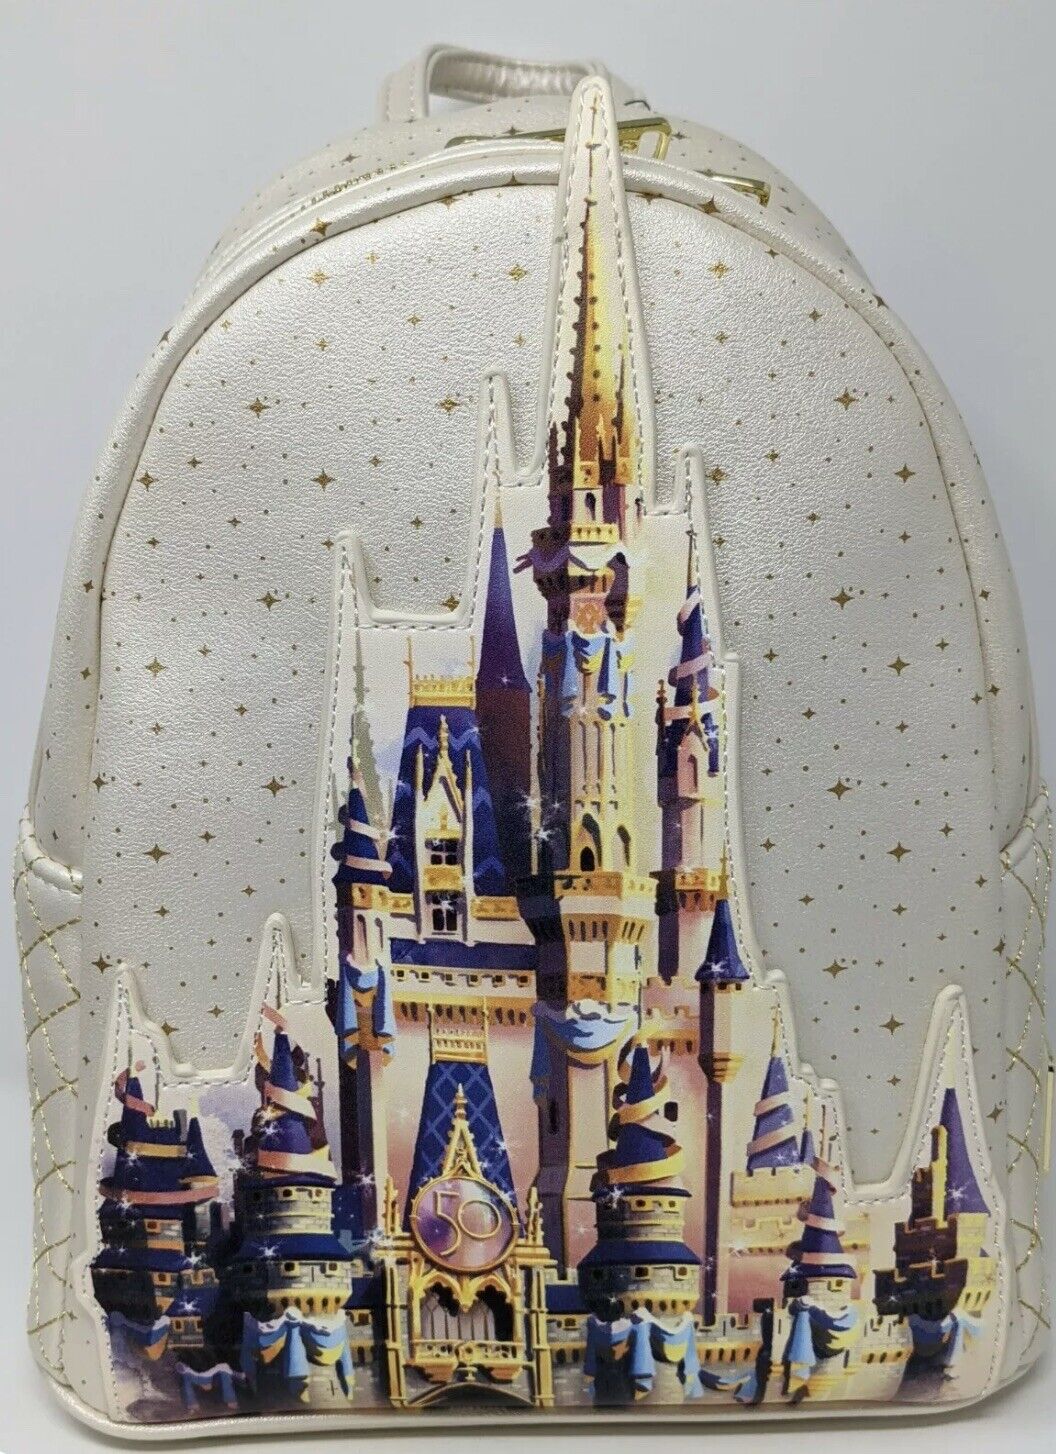 Disney Parks 2021 50th Anniversary Cinderella Castle Backpack Bag Loungefly